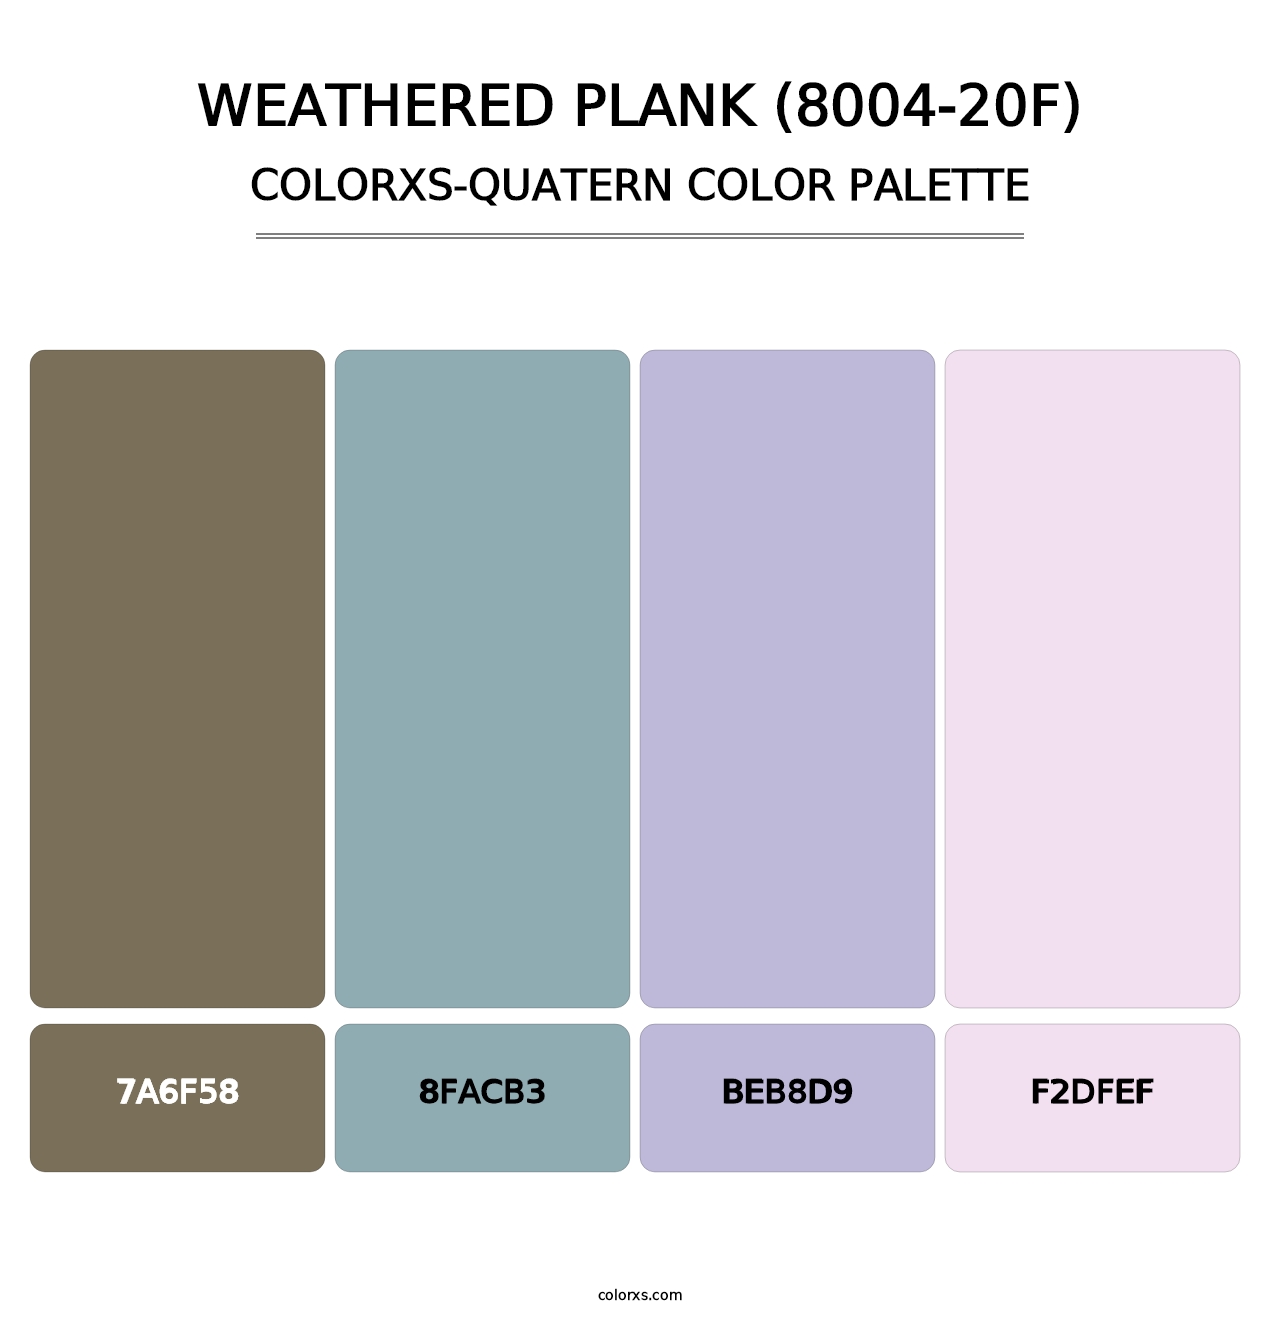 Weathered Plank (8004-20F) - Colorxs Quatern Palette